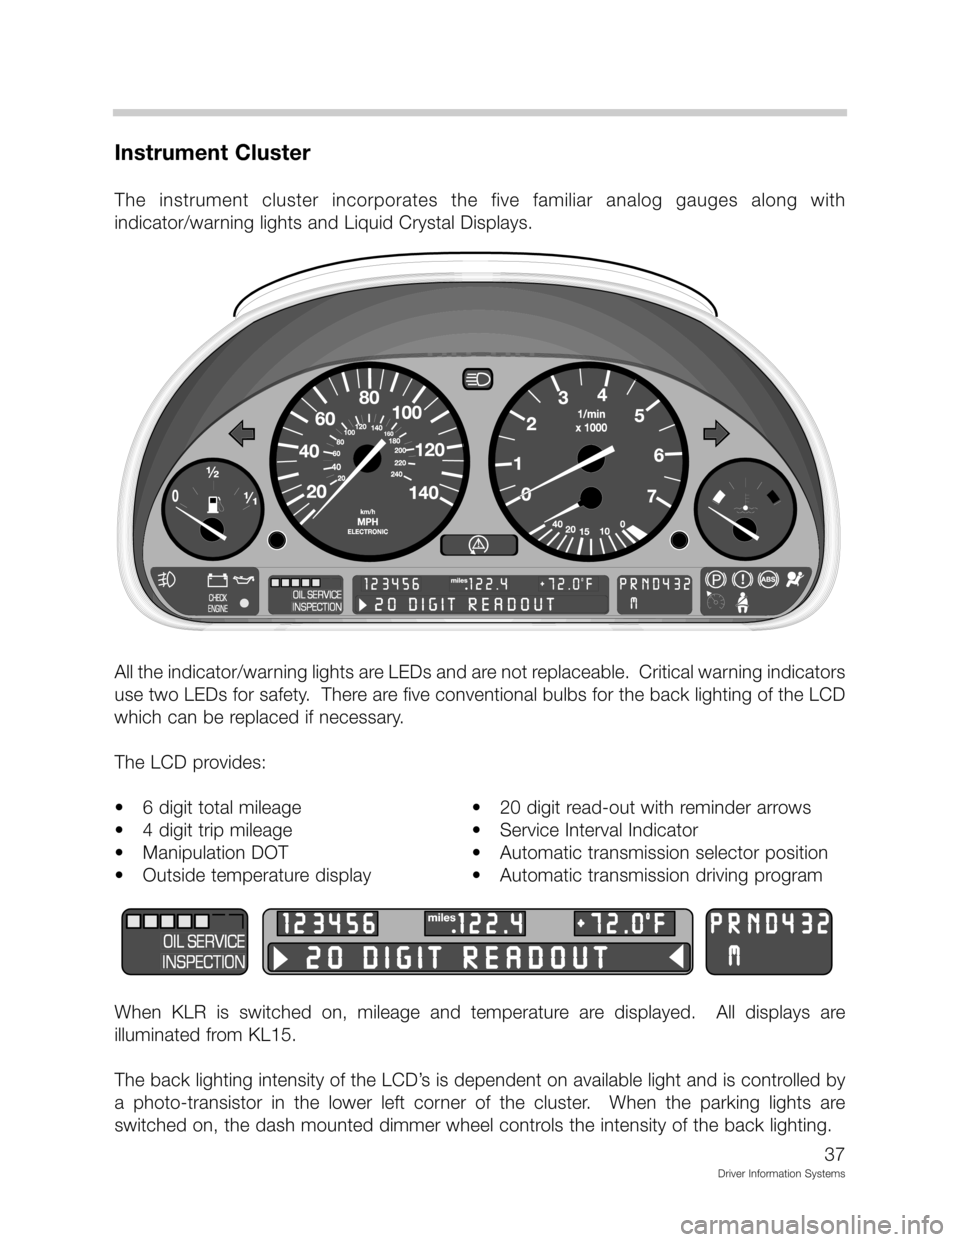 BMW Z3 ROADSTER 1999 E36 Driver Information Systems Manual 
		
 	
 
	   ;2 ;

 
 	 
 :
!":
!1D	!


-

!":
1